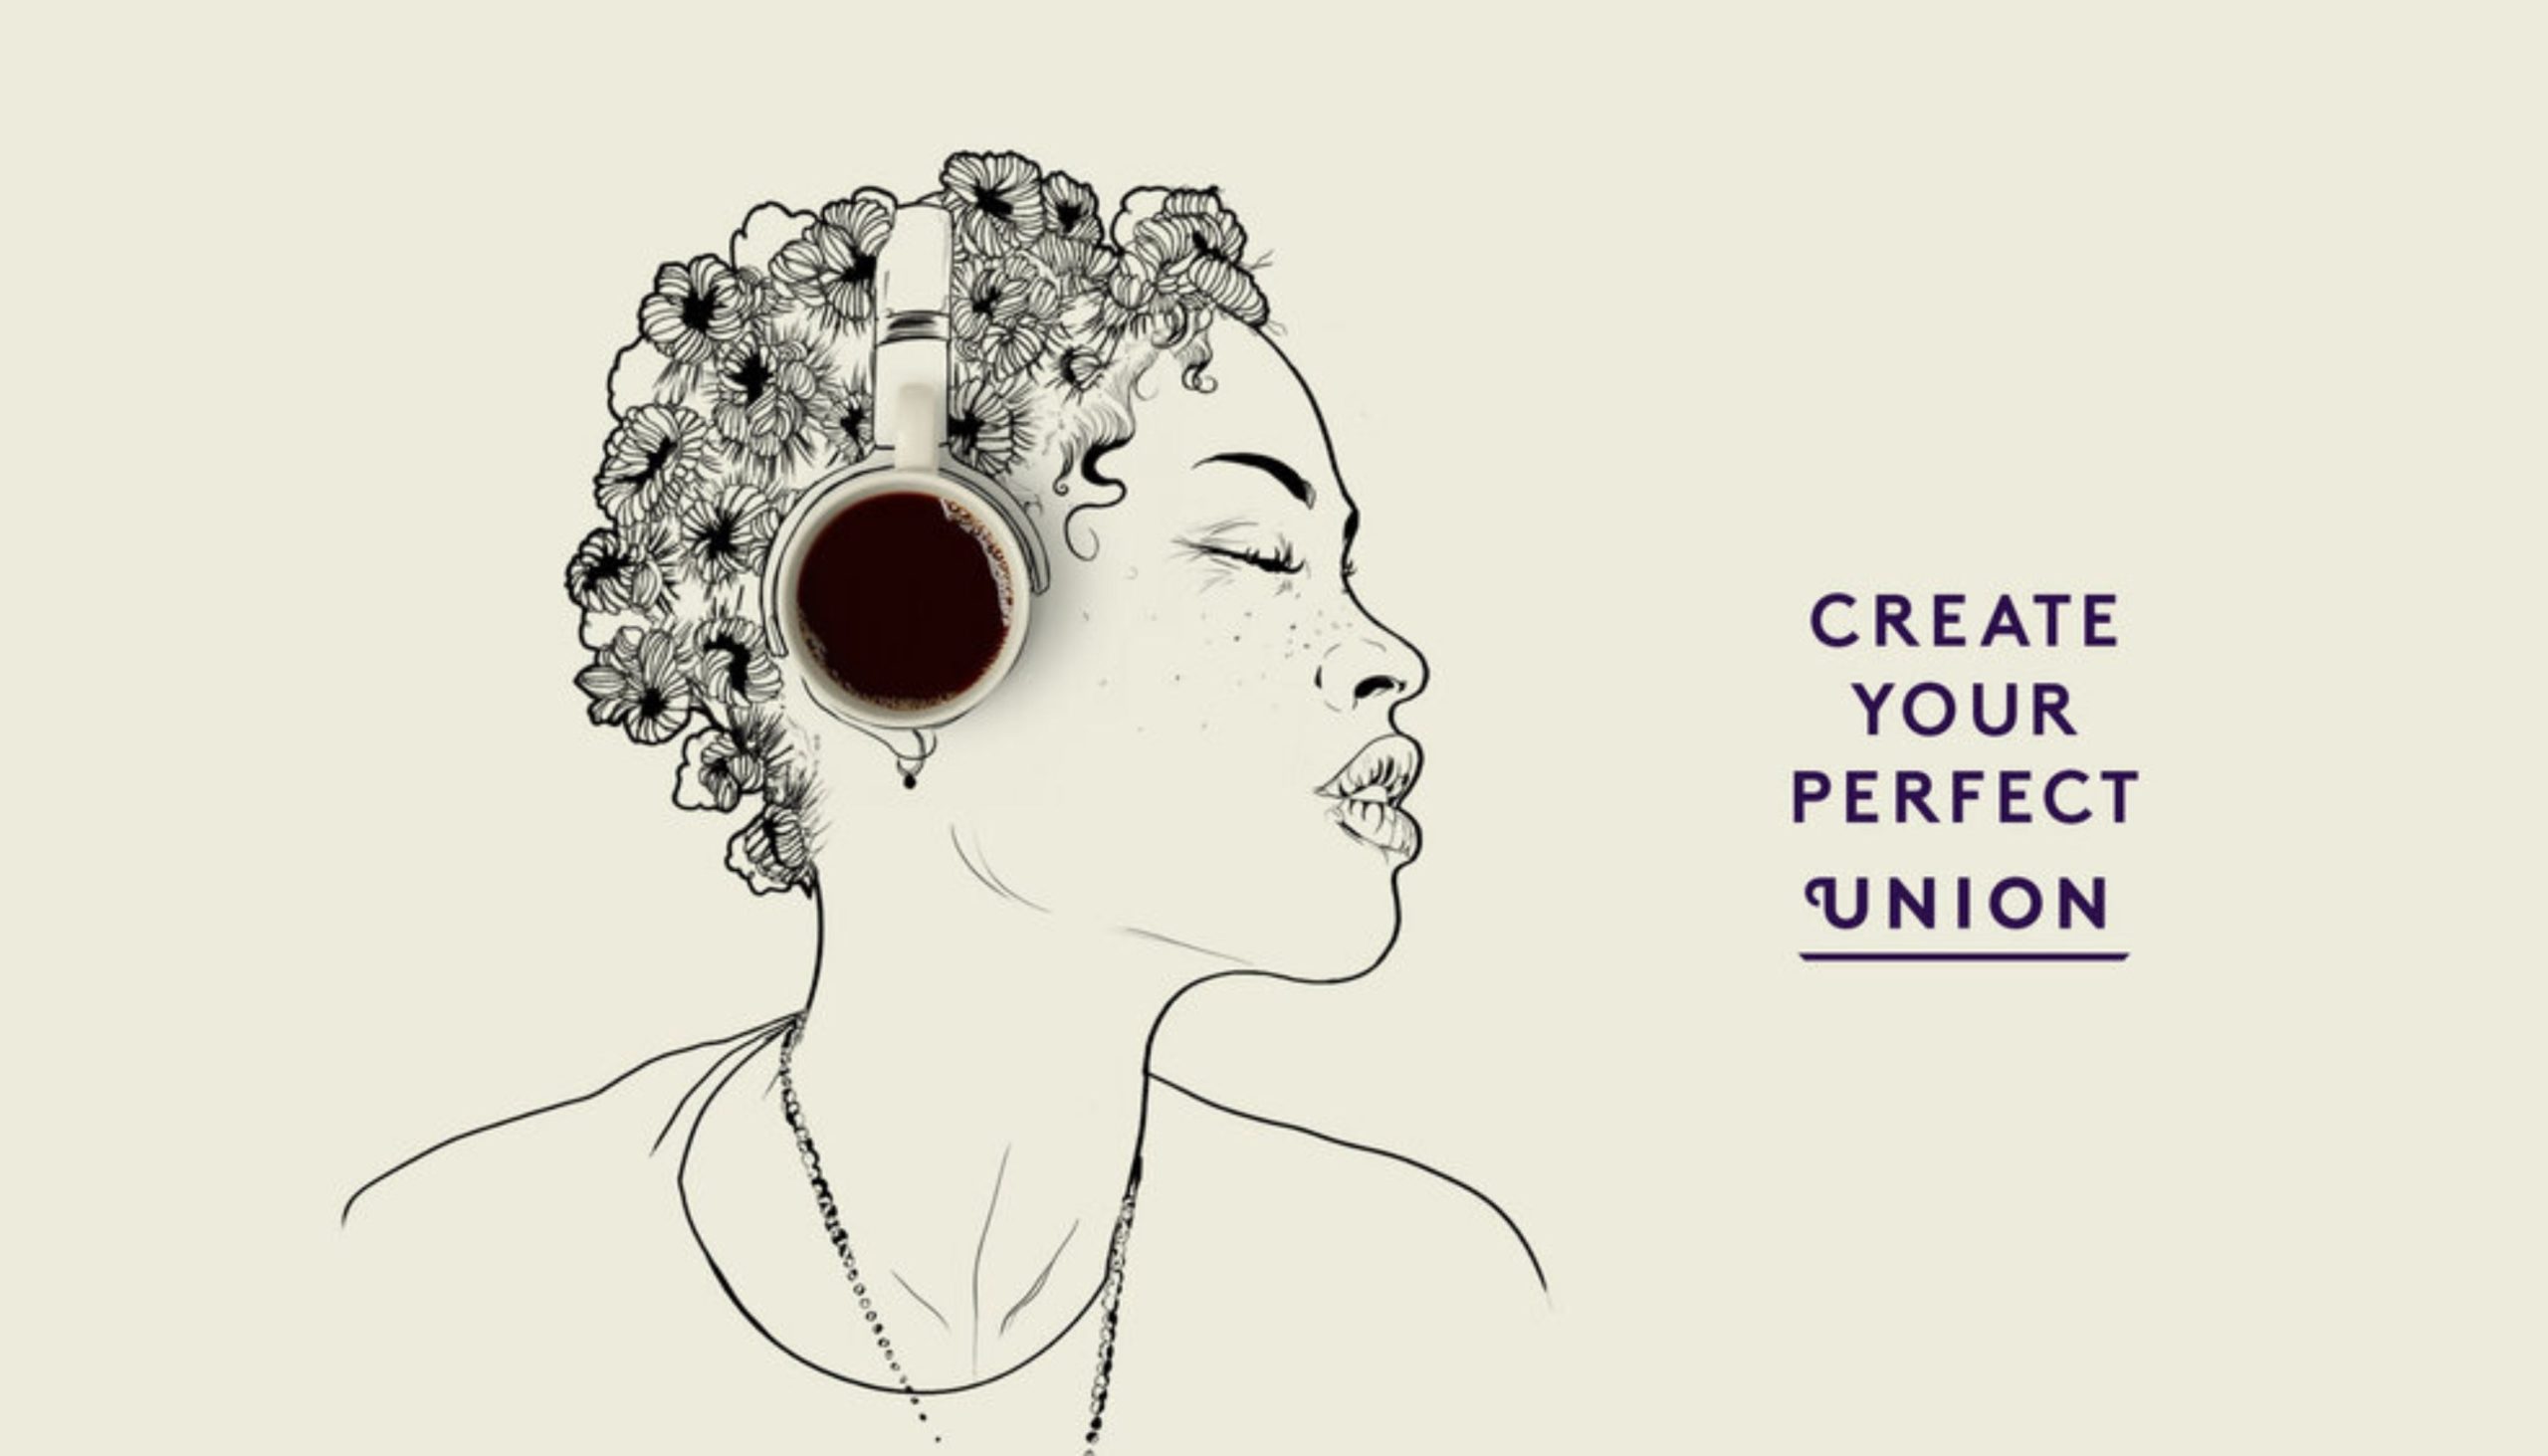 We're lovin' these "Create Your Perfect Union" ads created for Union Coffee